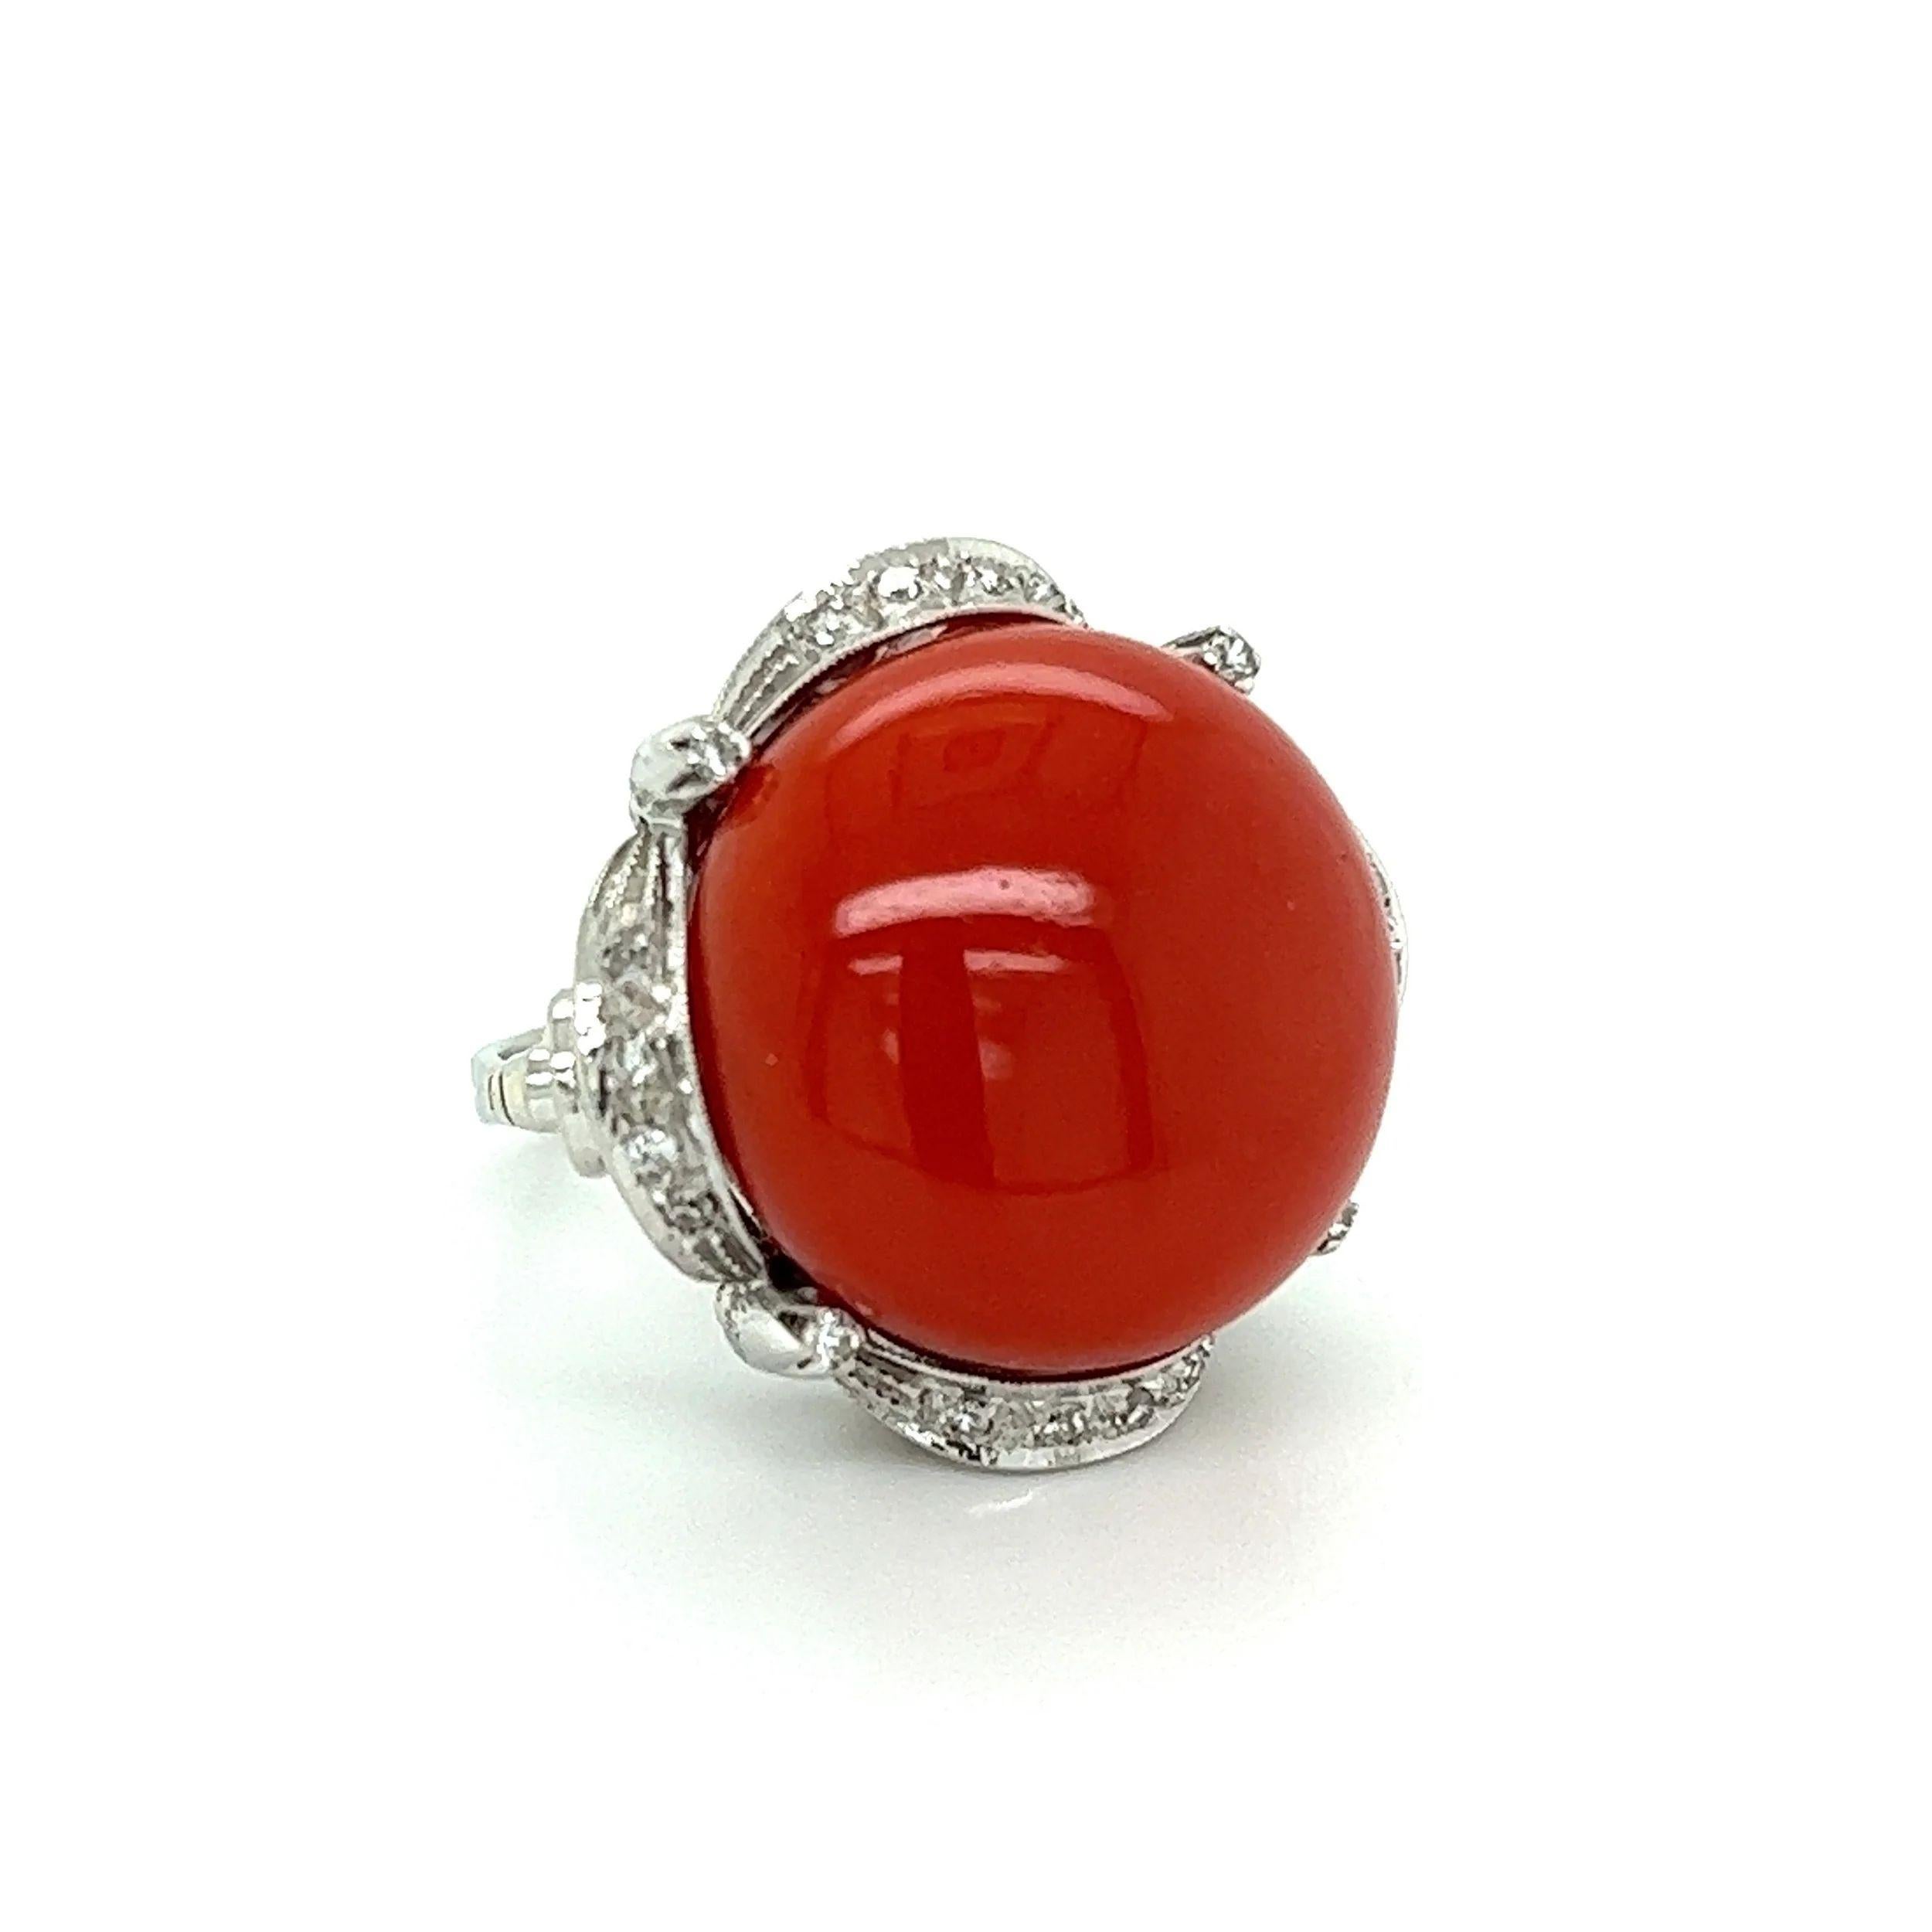 Simply Beautiful! Finely detailed Cabochon Red Coral and Diamond Gold Cocktail Ring. Centering a securely Hand set Awesome 27.90 Carat Cabochon Red Coral, artfully surrounded by Diamonds, weighing approx. 0.16tcw. Hand crafted 14K Yellow Gold